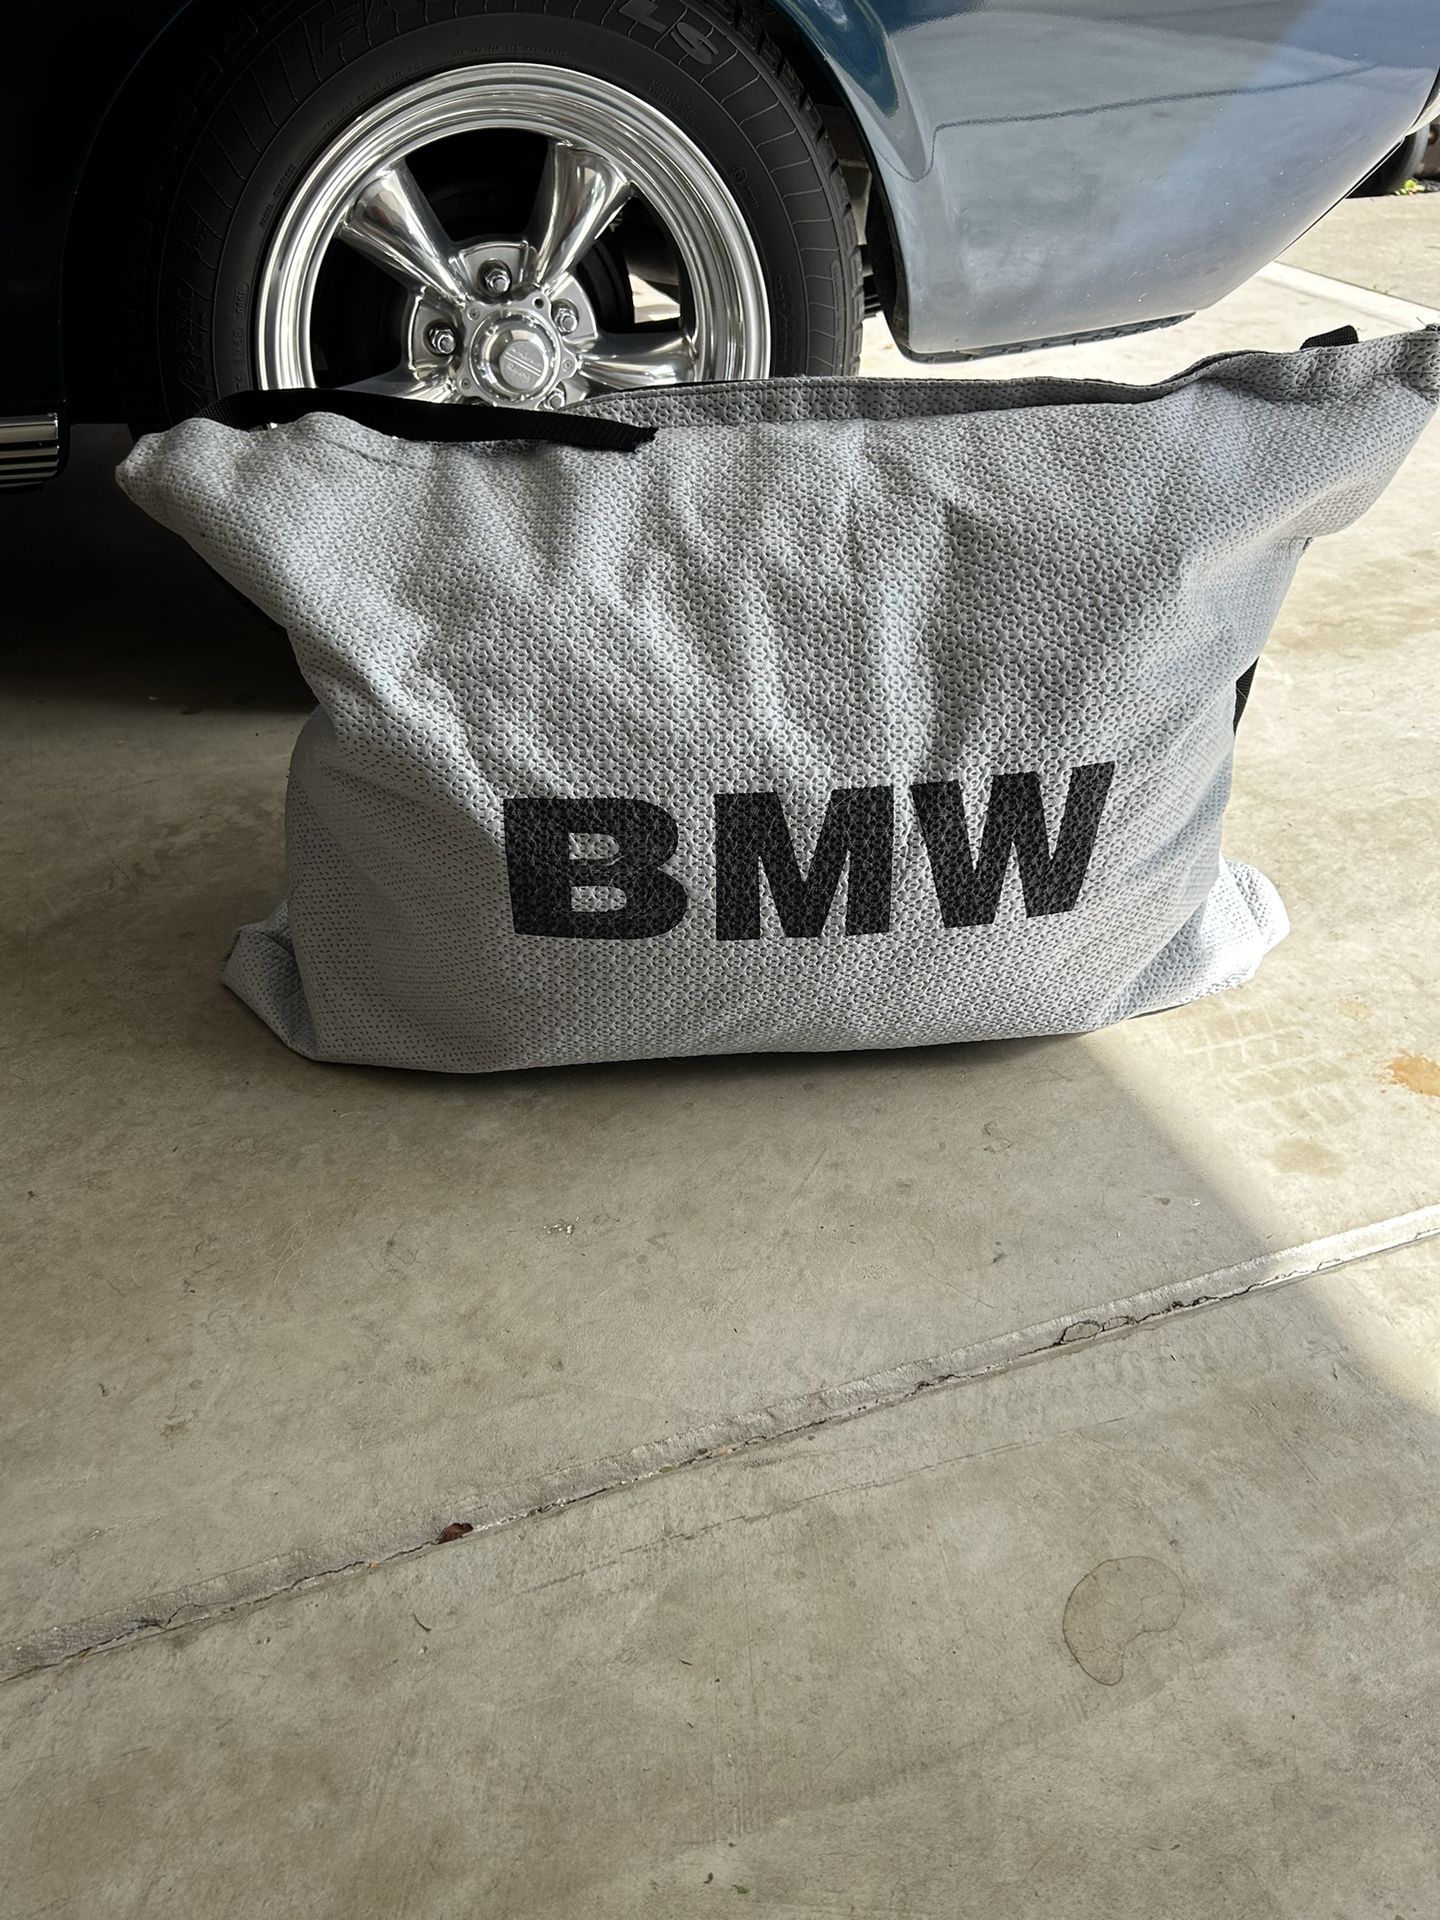 BMW OEM Car Cover 330i 2006 And Fits Most 4 Door 3 Series 